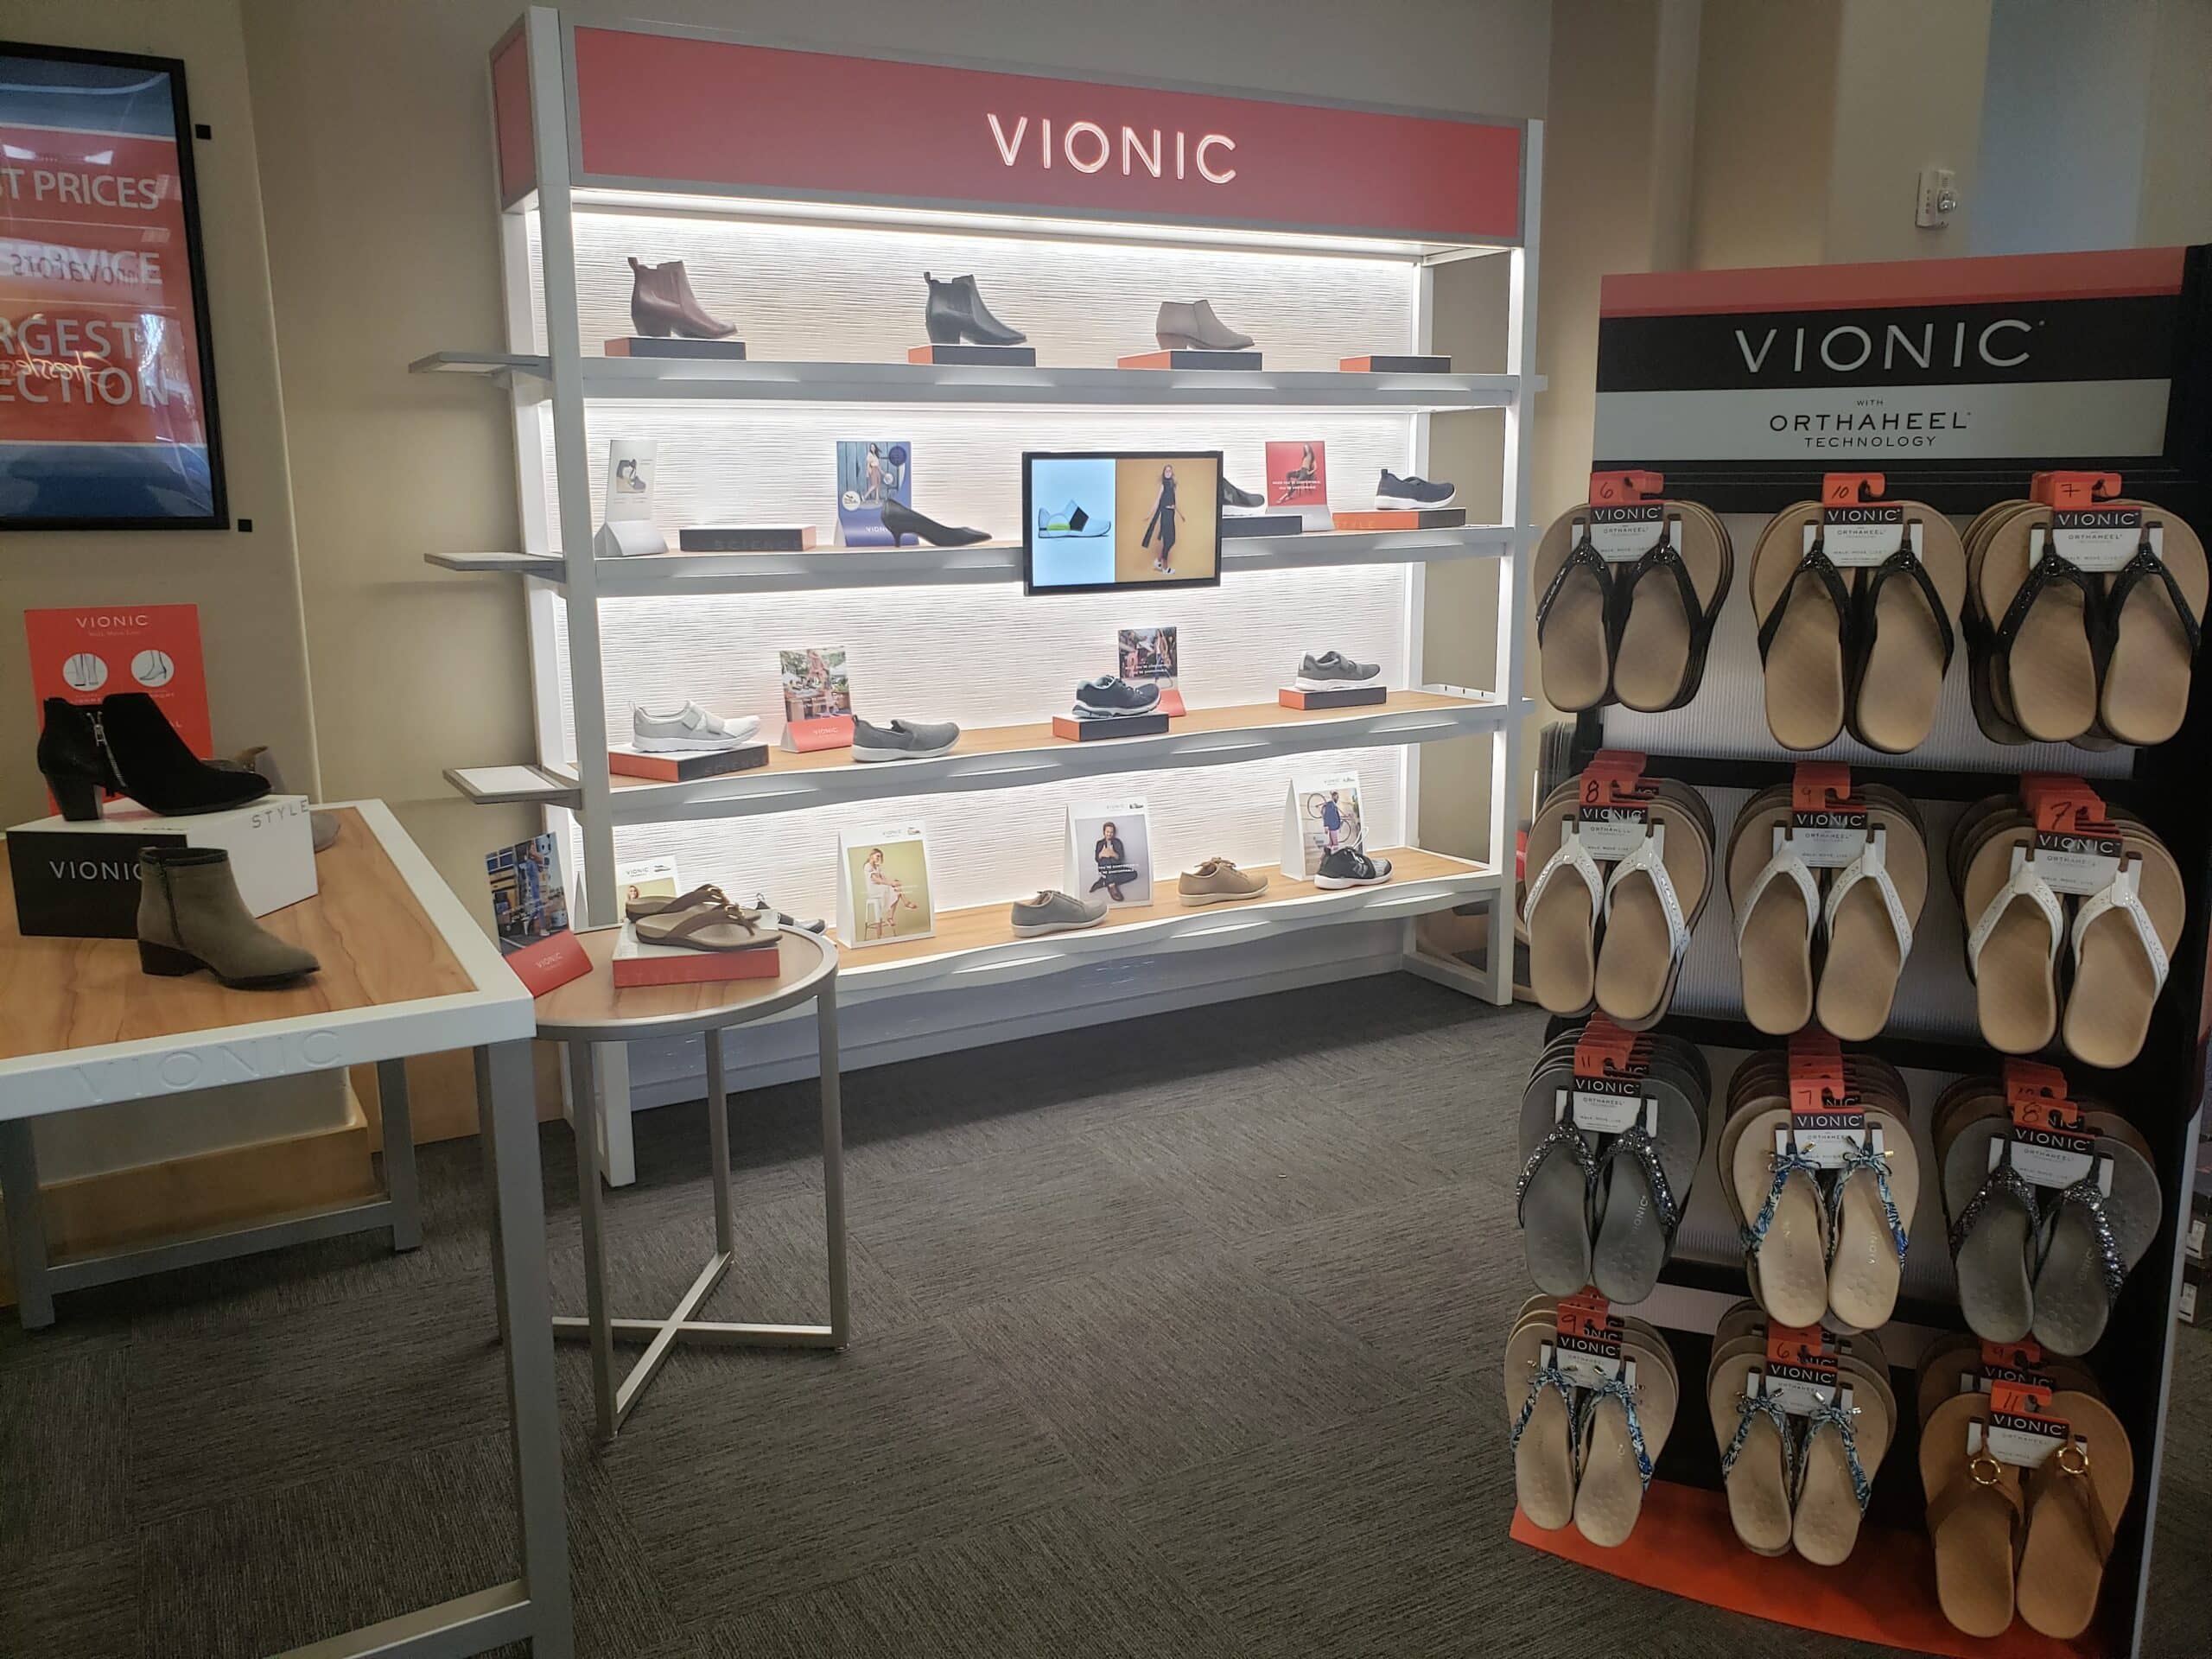 Stockton Vionic Shoes Slippers Boots and Sandals